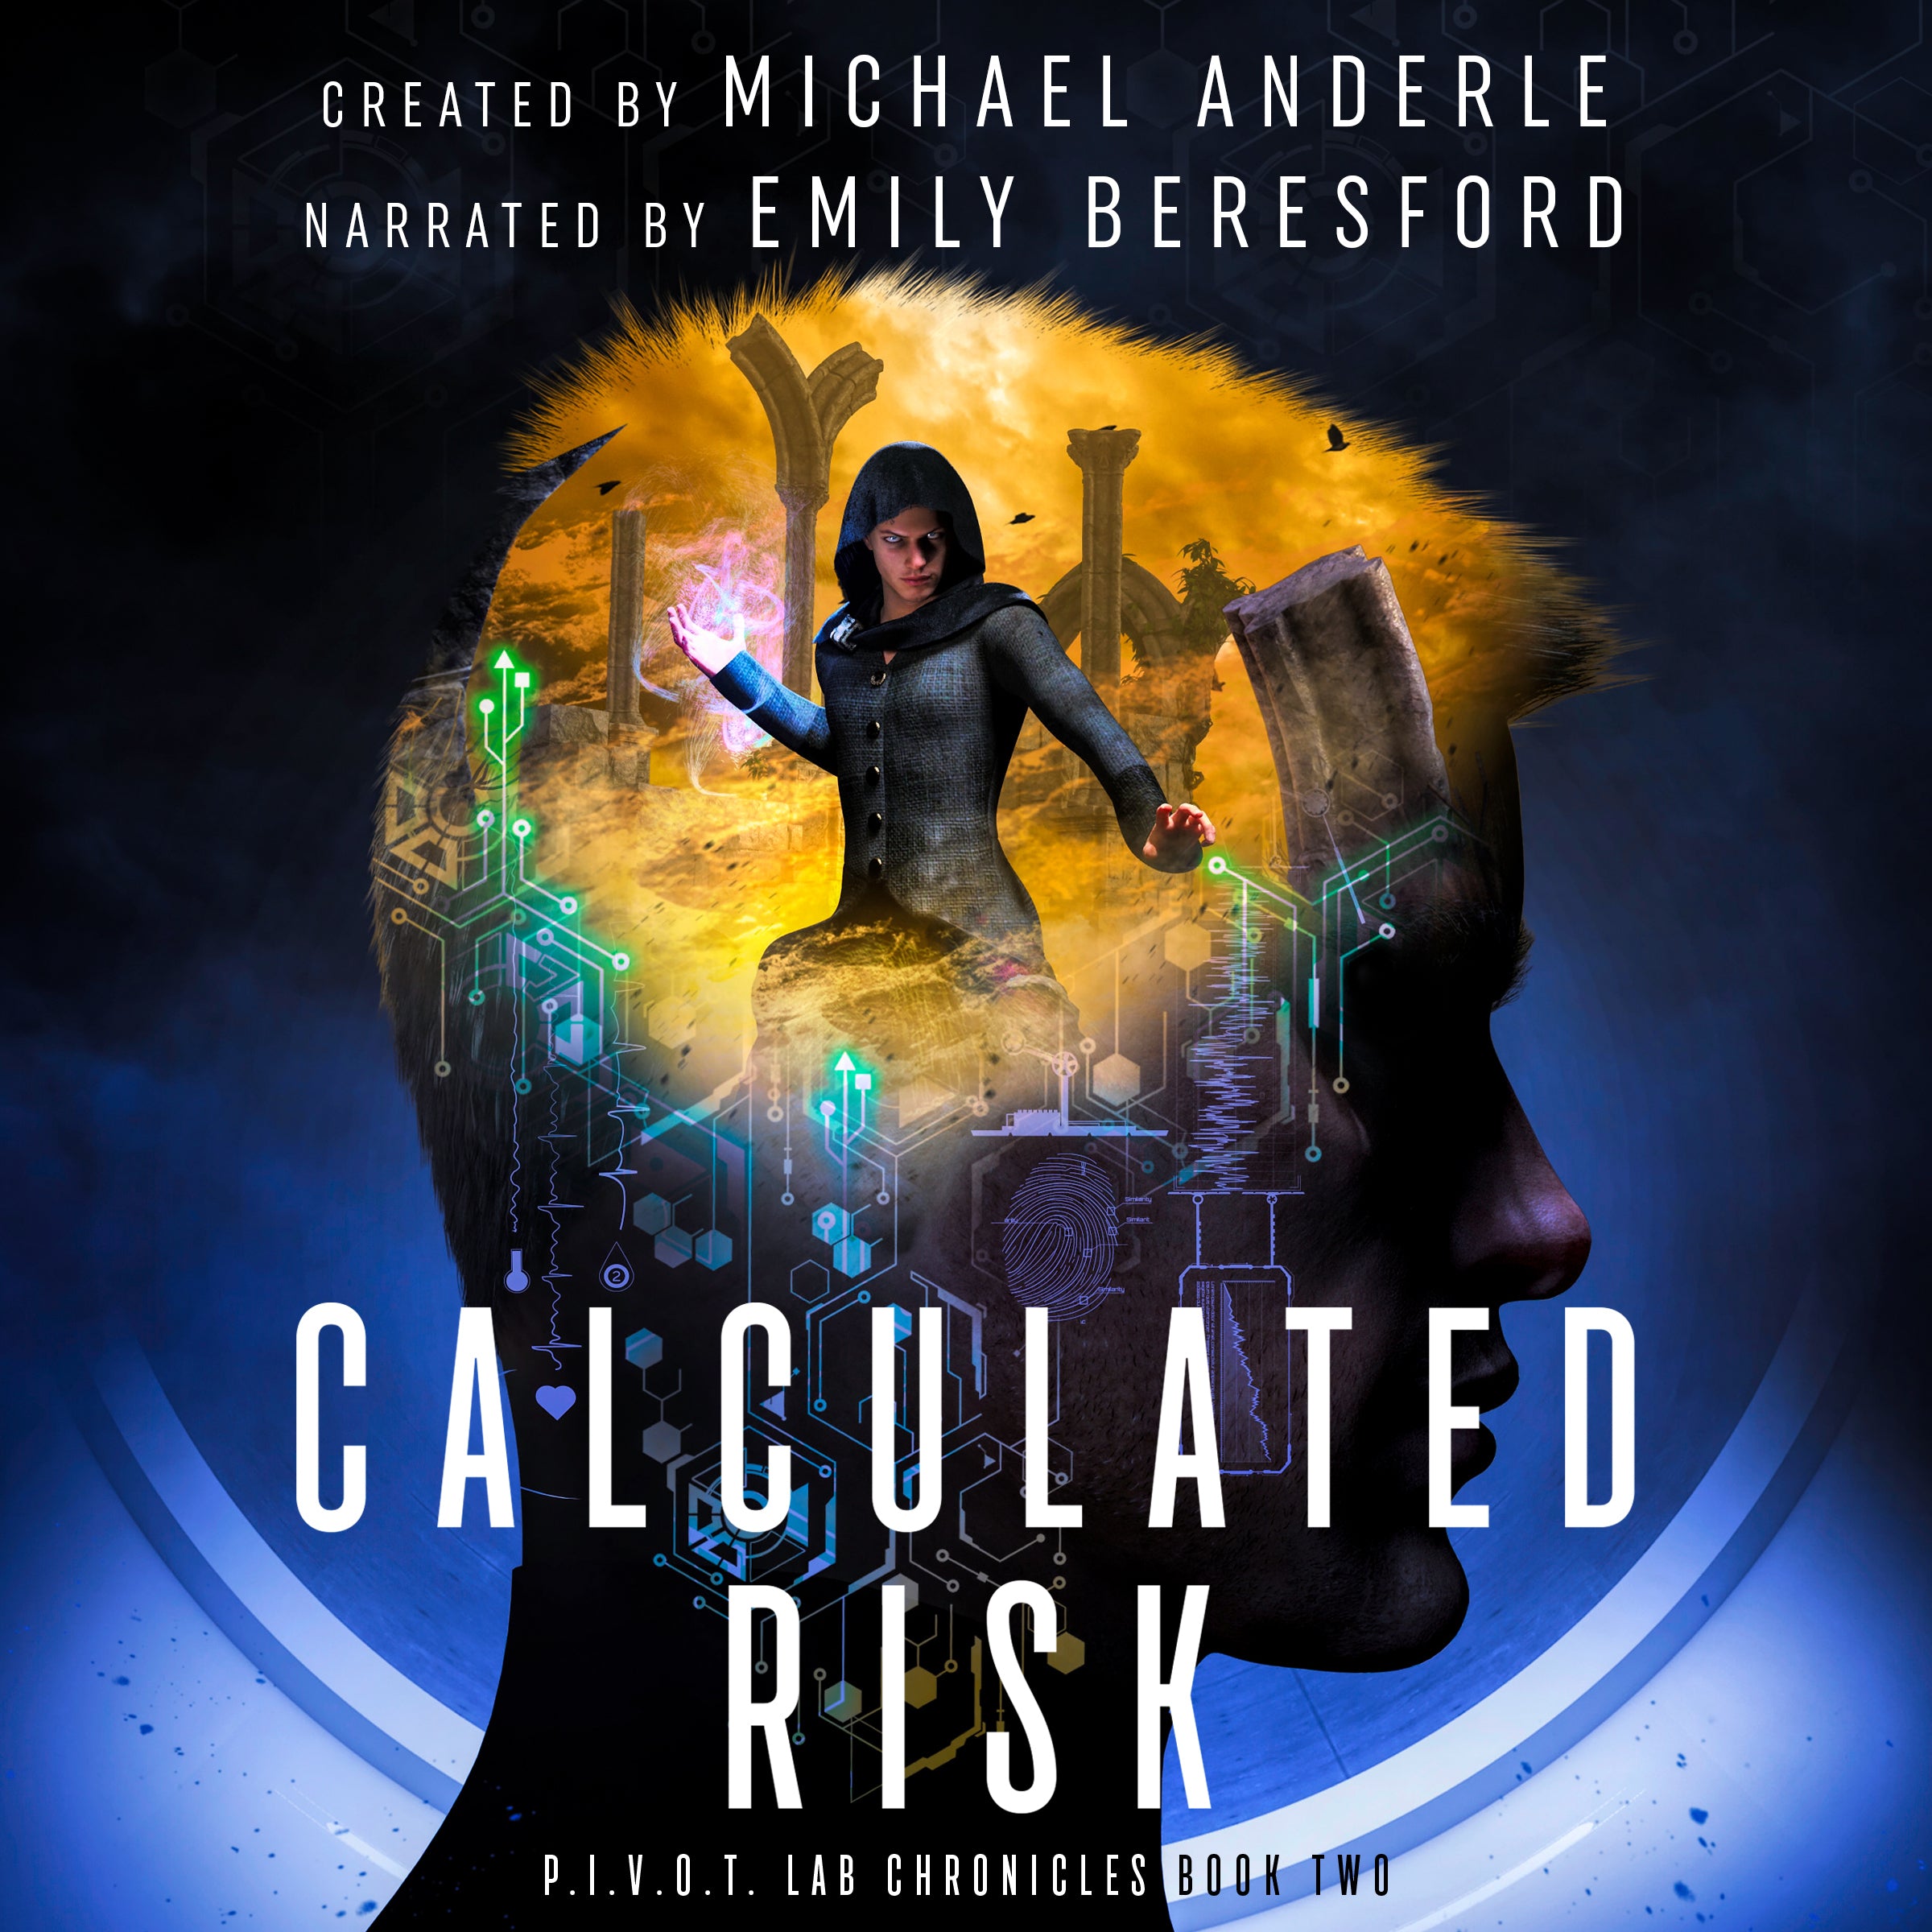 Book 2: Calculated Risk Audiobook